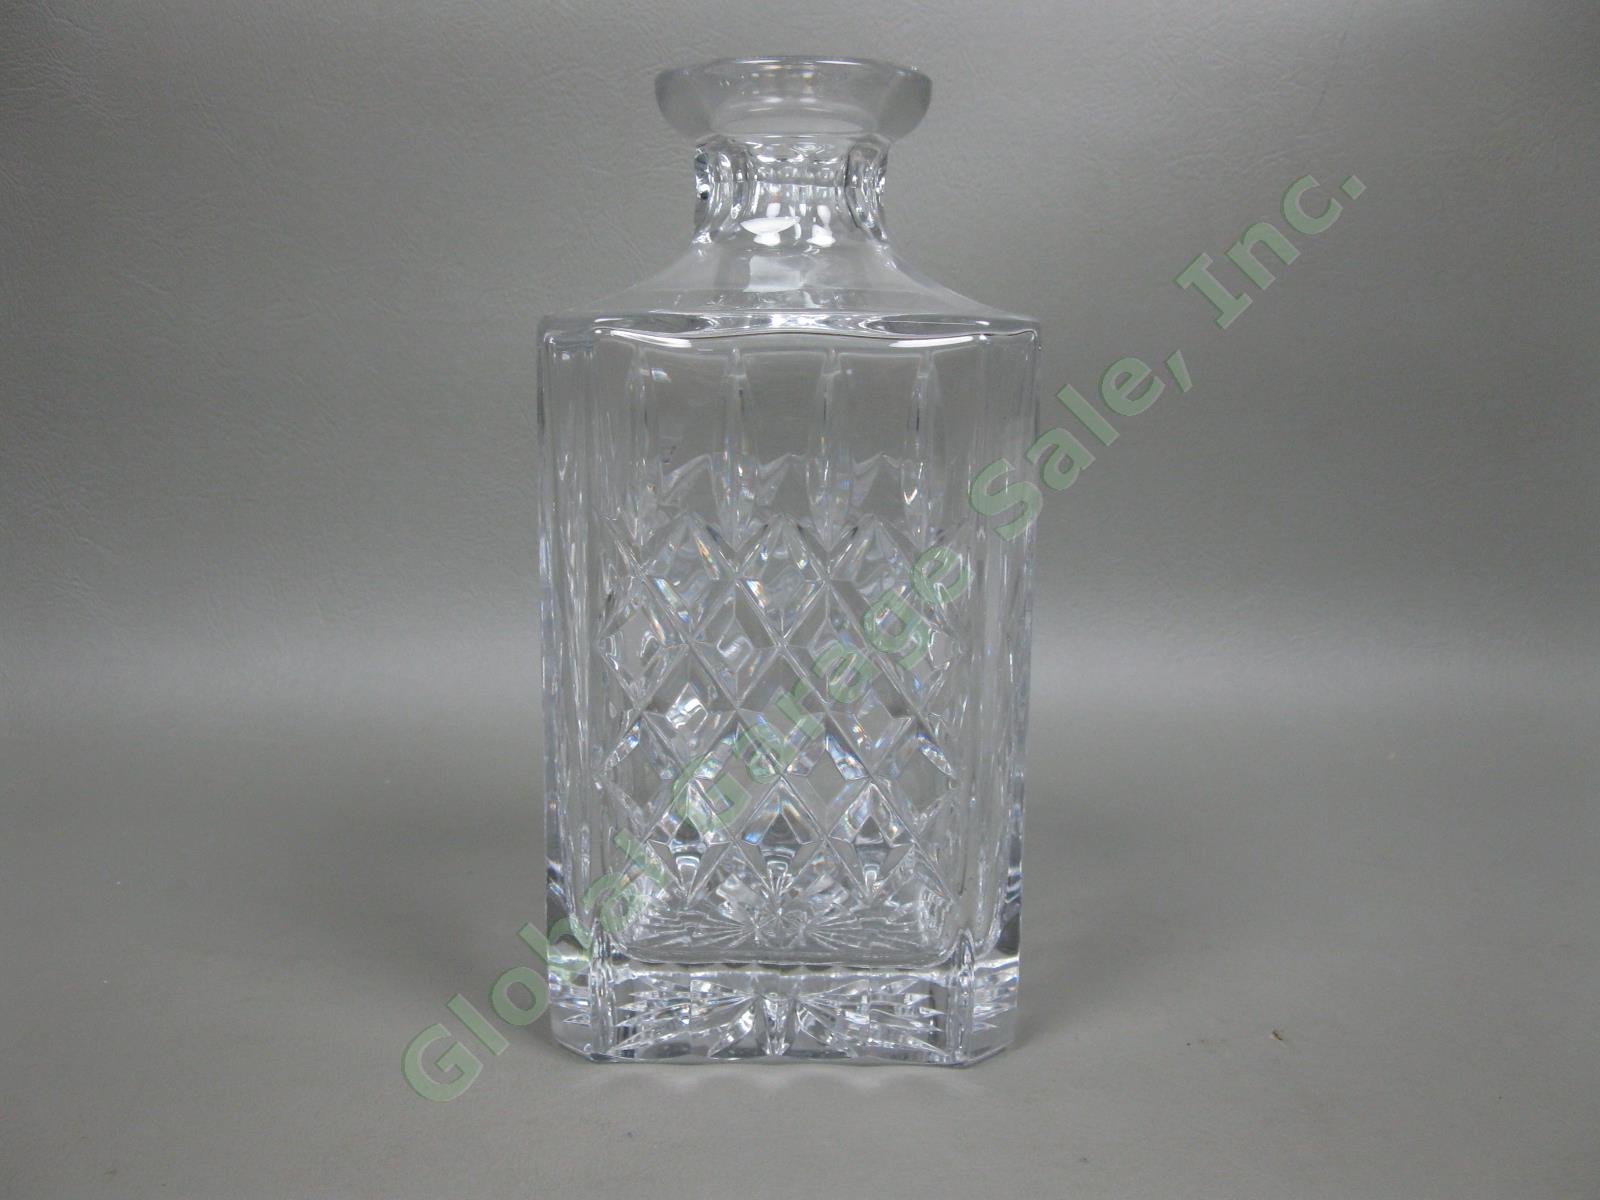 Vintage Waterford 10.75" Cut Crystal Rectangular Glass Liquor Decanter & Stopper 4